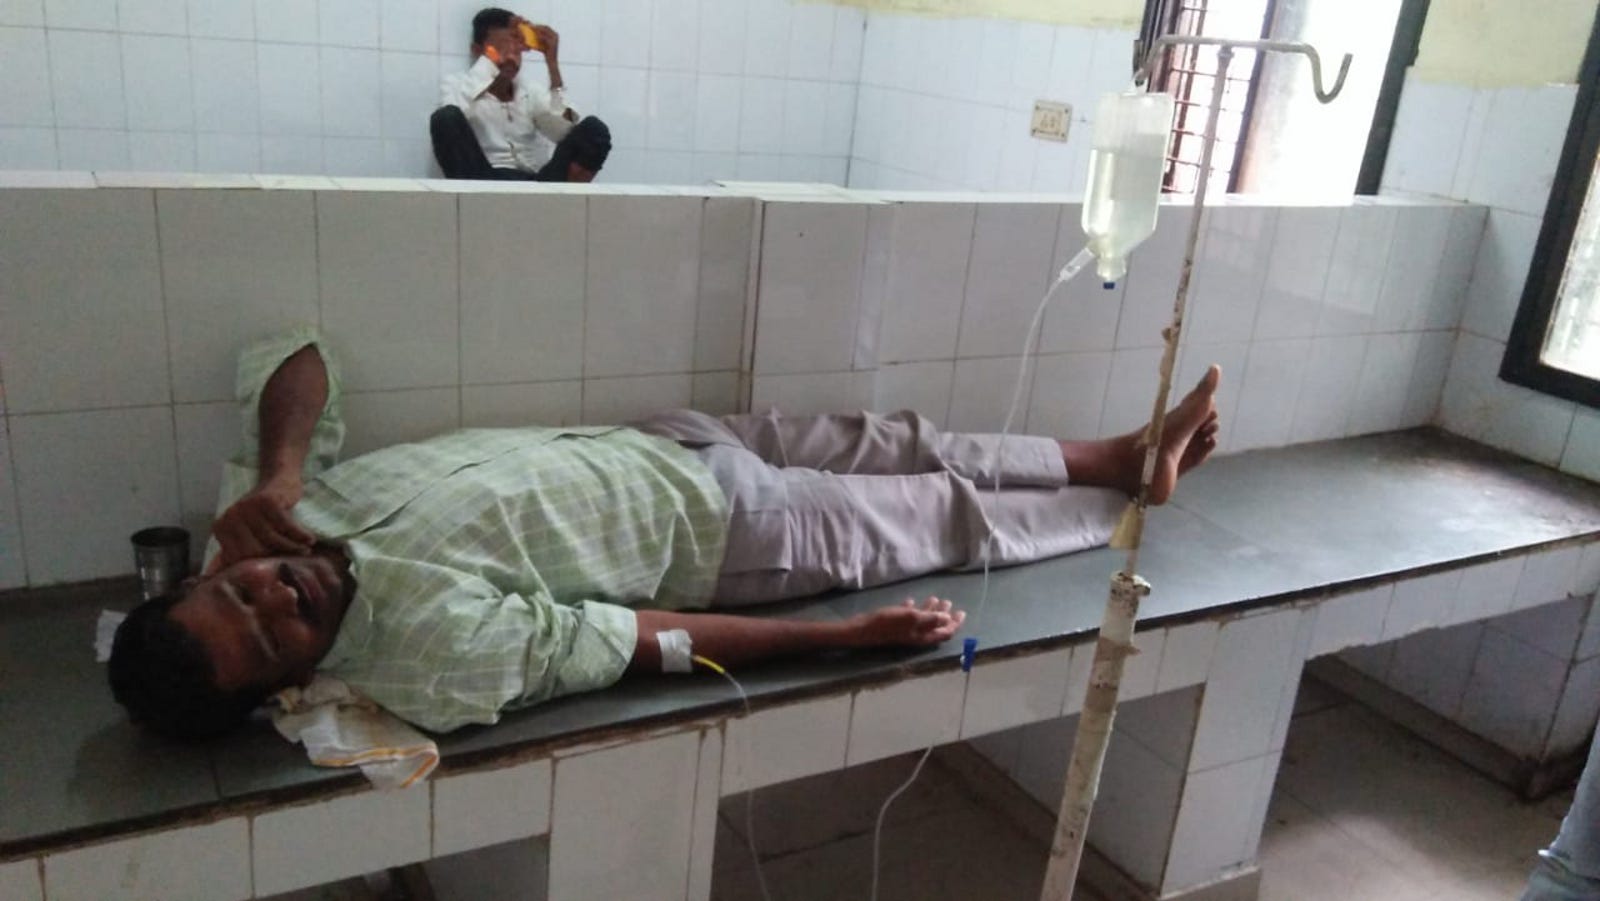 The patients were lying on the ground in the hospital, MP left after d